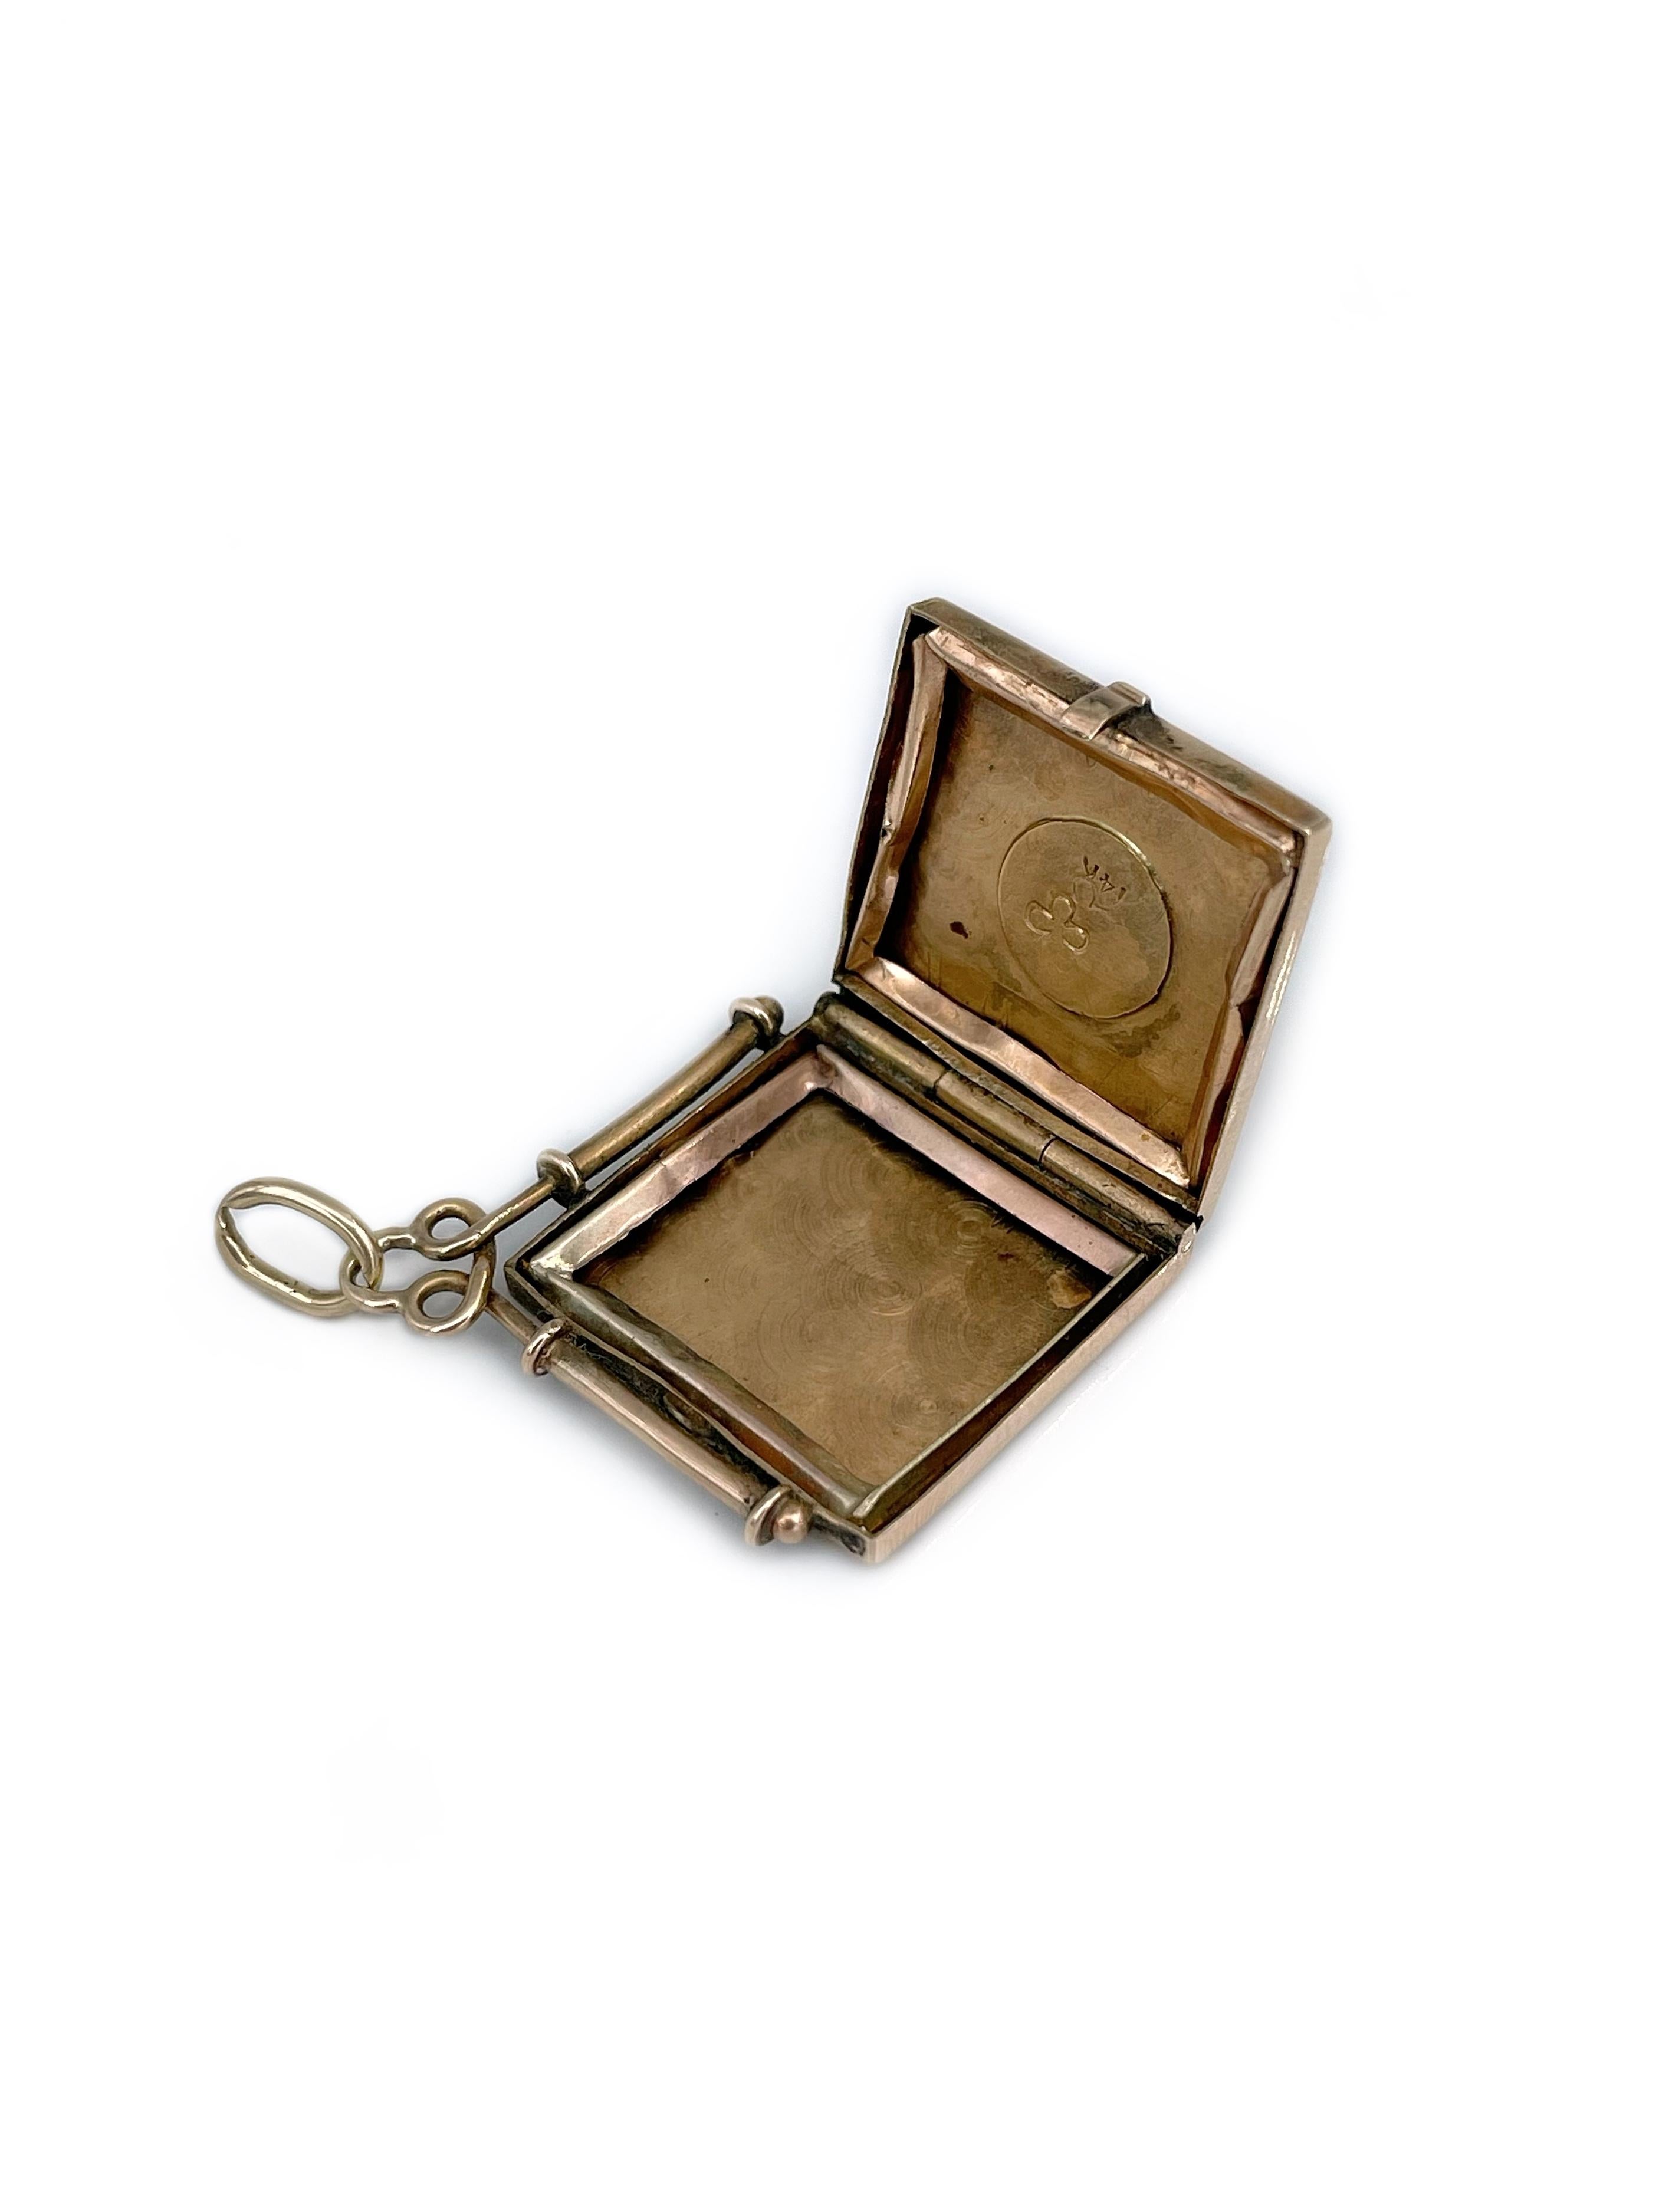 This is a delicate square shape locket pendant crafted in 14K yellow gold. Circa 1910. 

The piece is decorated with subtle carvings. It has a space for pictures inside. 

“14K” engraved inside (shown in photo gallery).

Weight: 4.67g
Size: